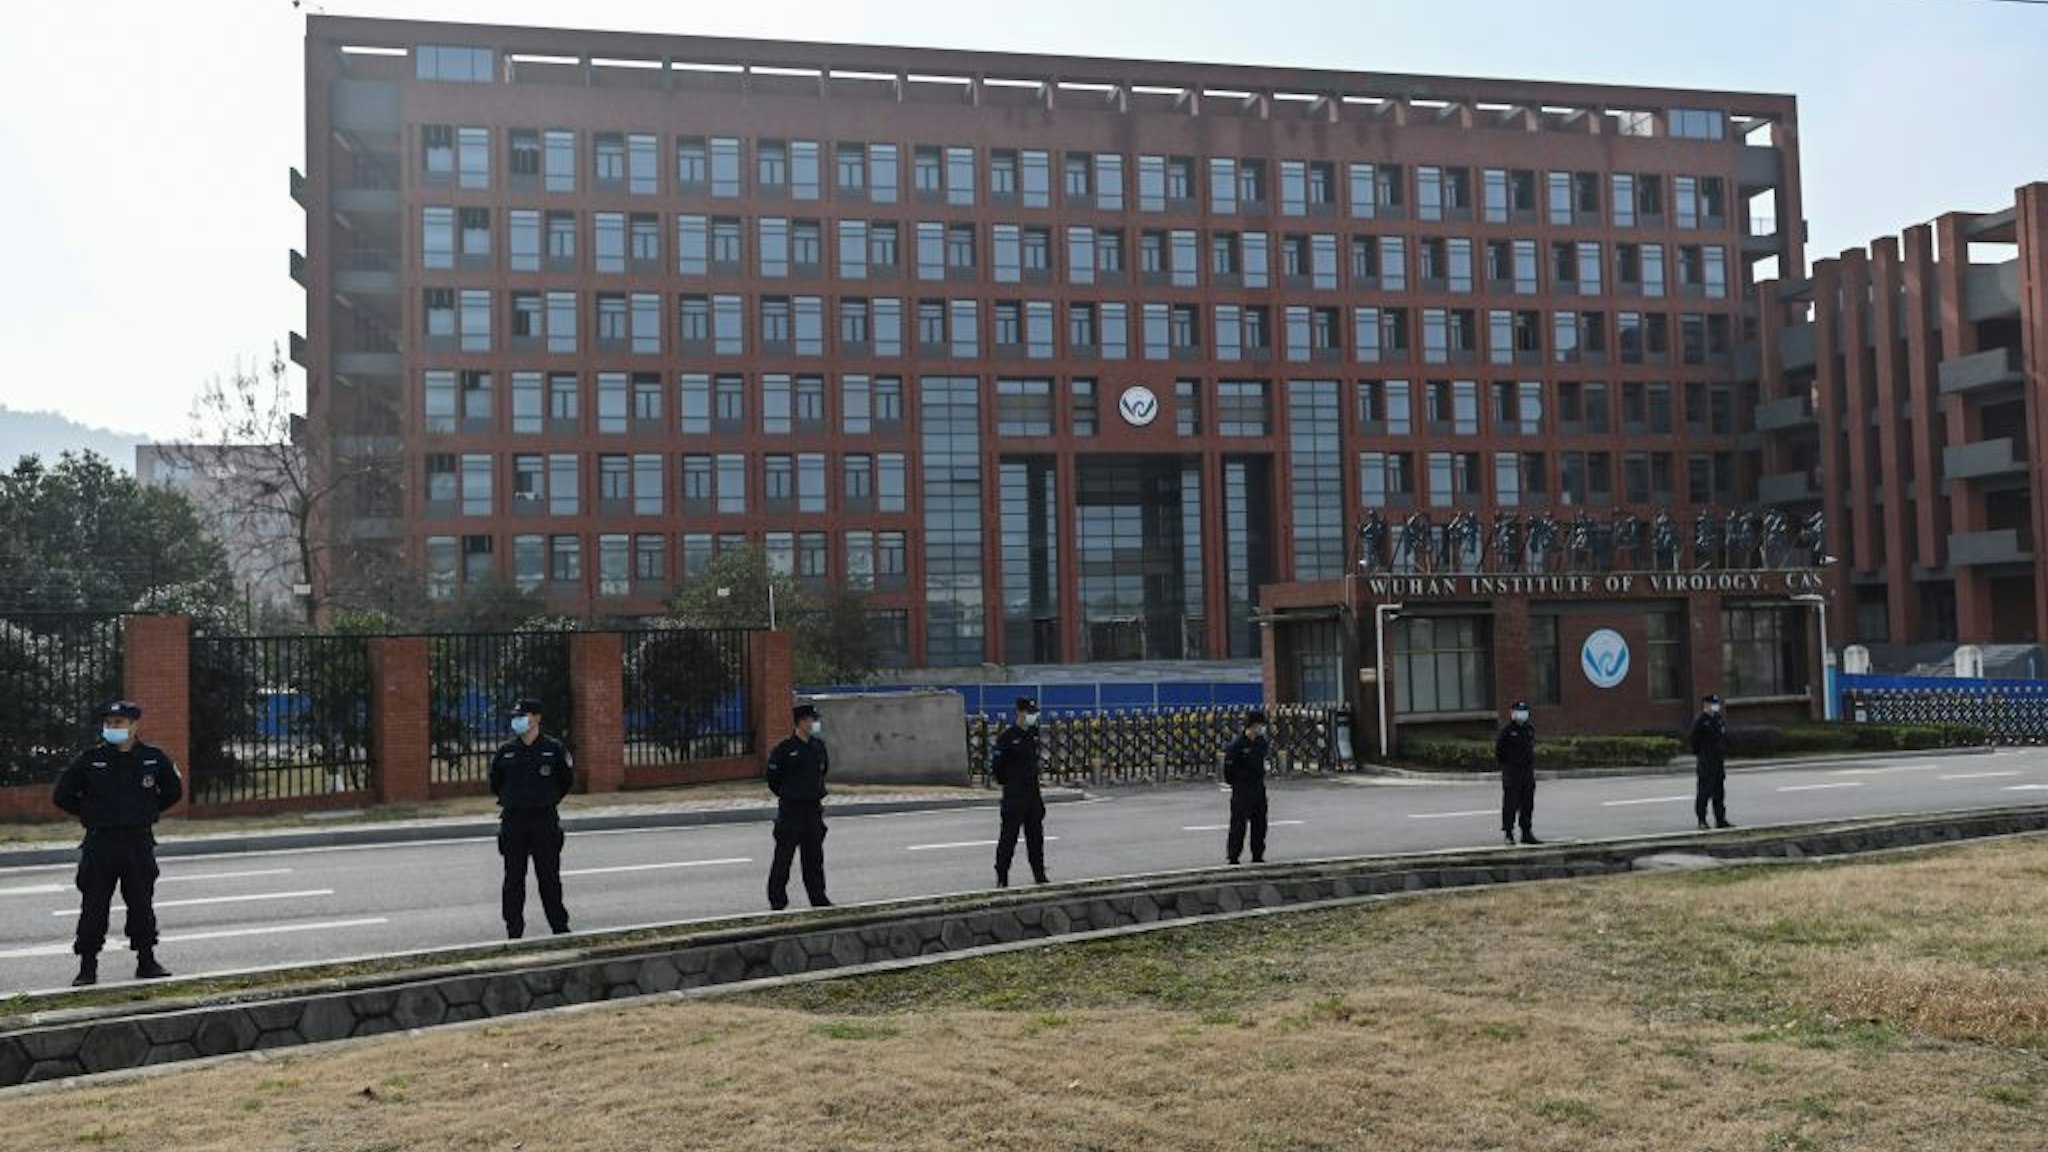 This general view shows the Wuhan Institute of Virology in Wuhan, in China's central Hubei province on February 3, 2021, as members of the World Health Organization (WHO) team investigating the origins of the COVID-19 coronavirus, visit. (Photo by Hector RETAMAL / AFP)